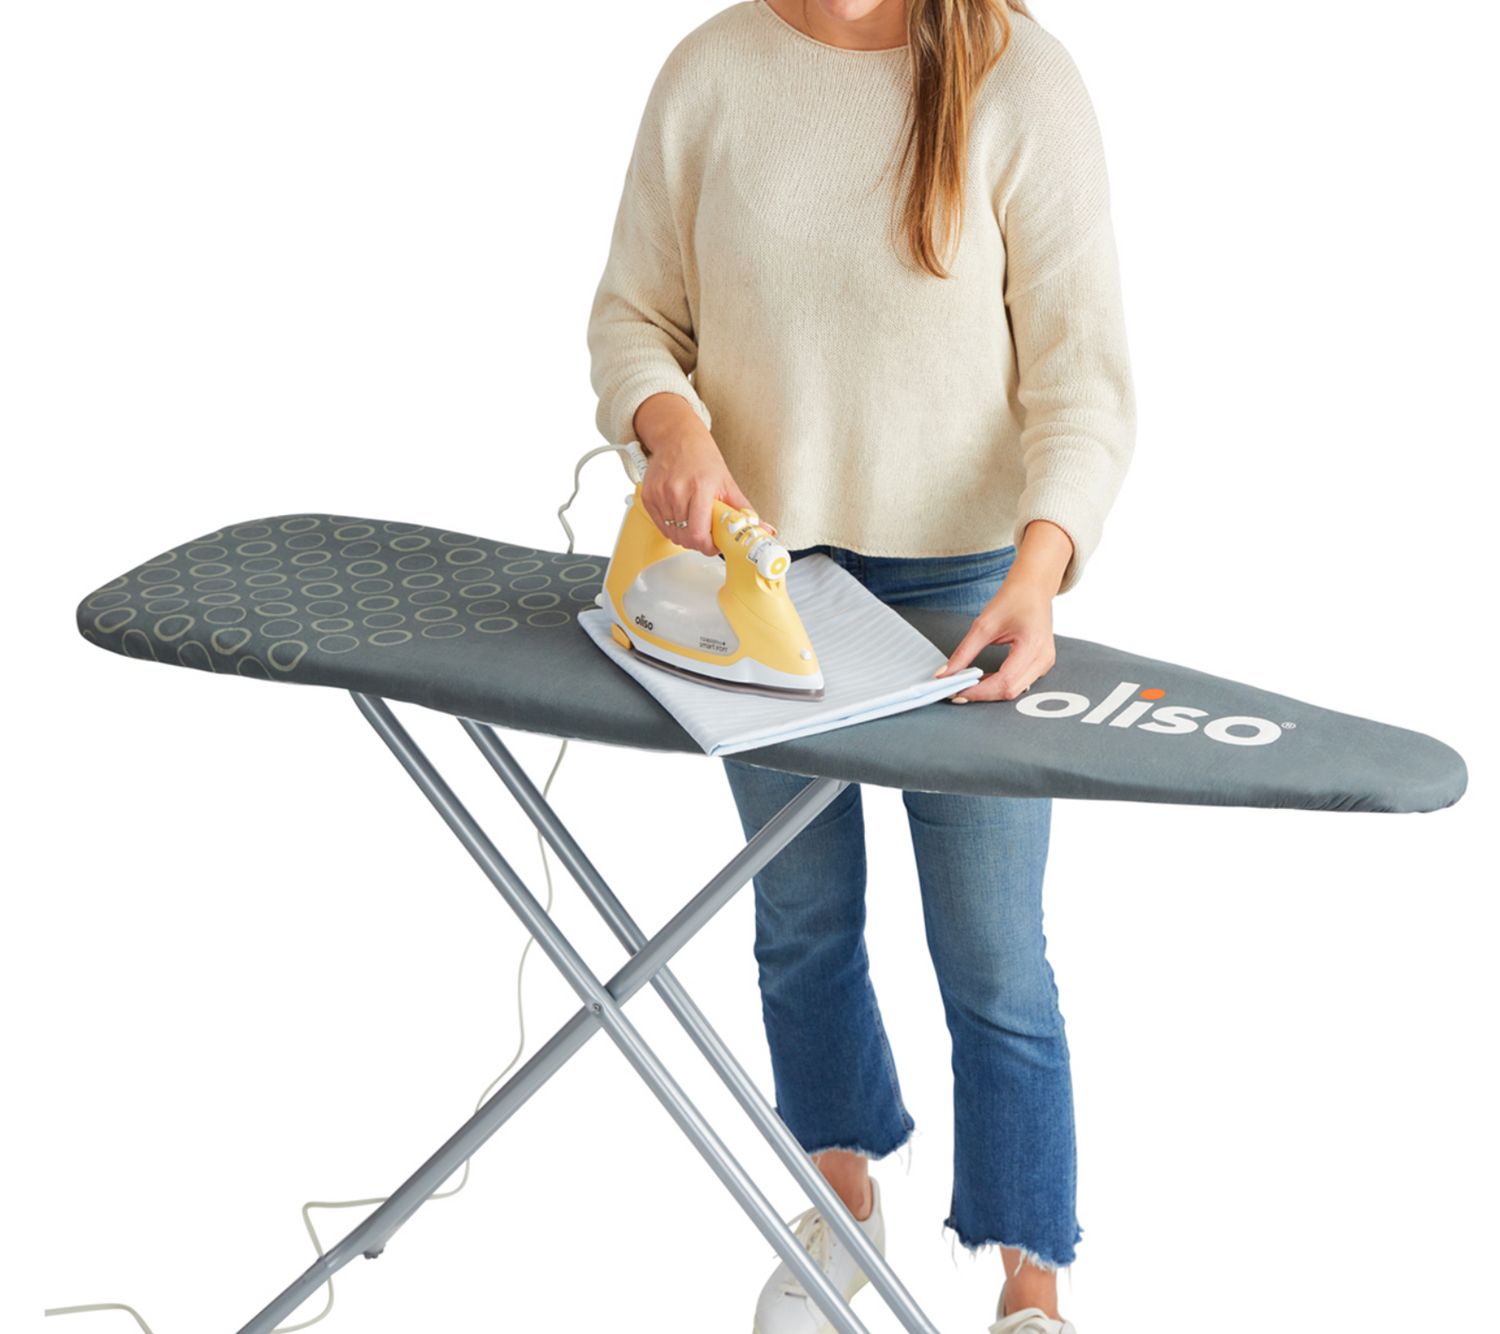 Best Ironing Board Cover - Buy Oliso Ironing Covers Online – oliso